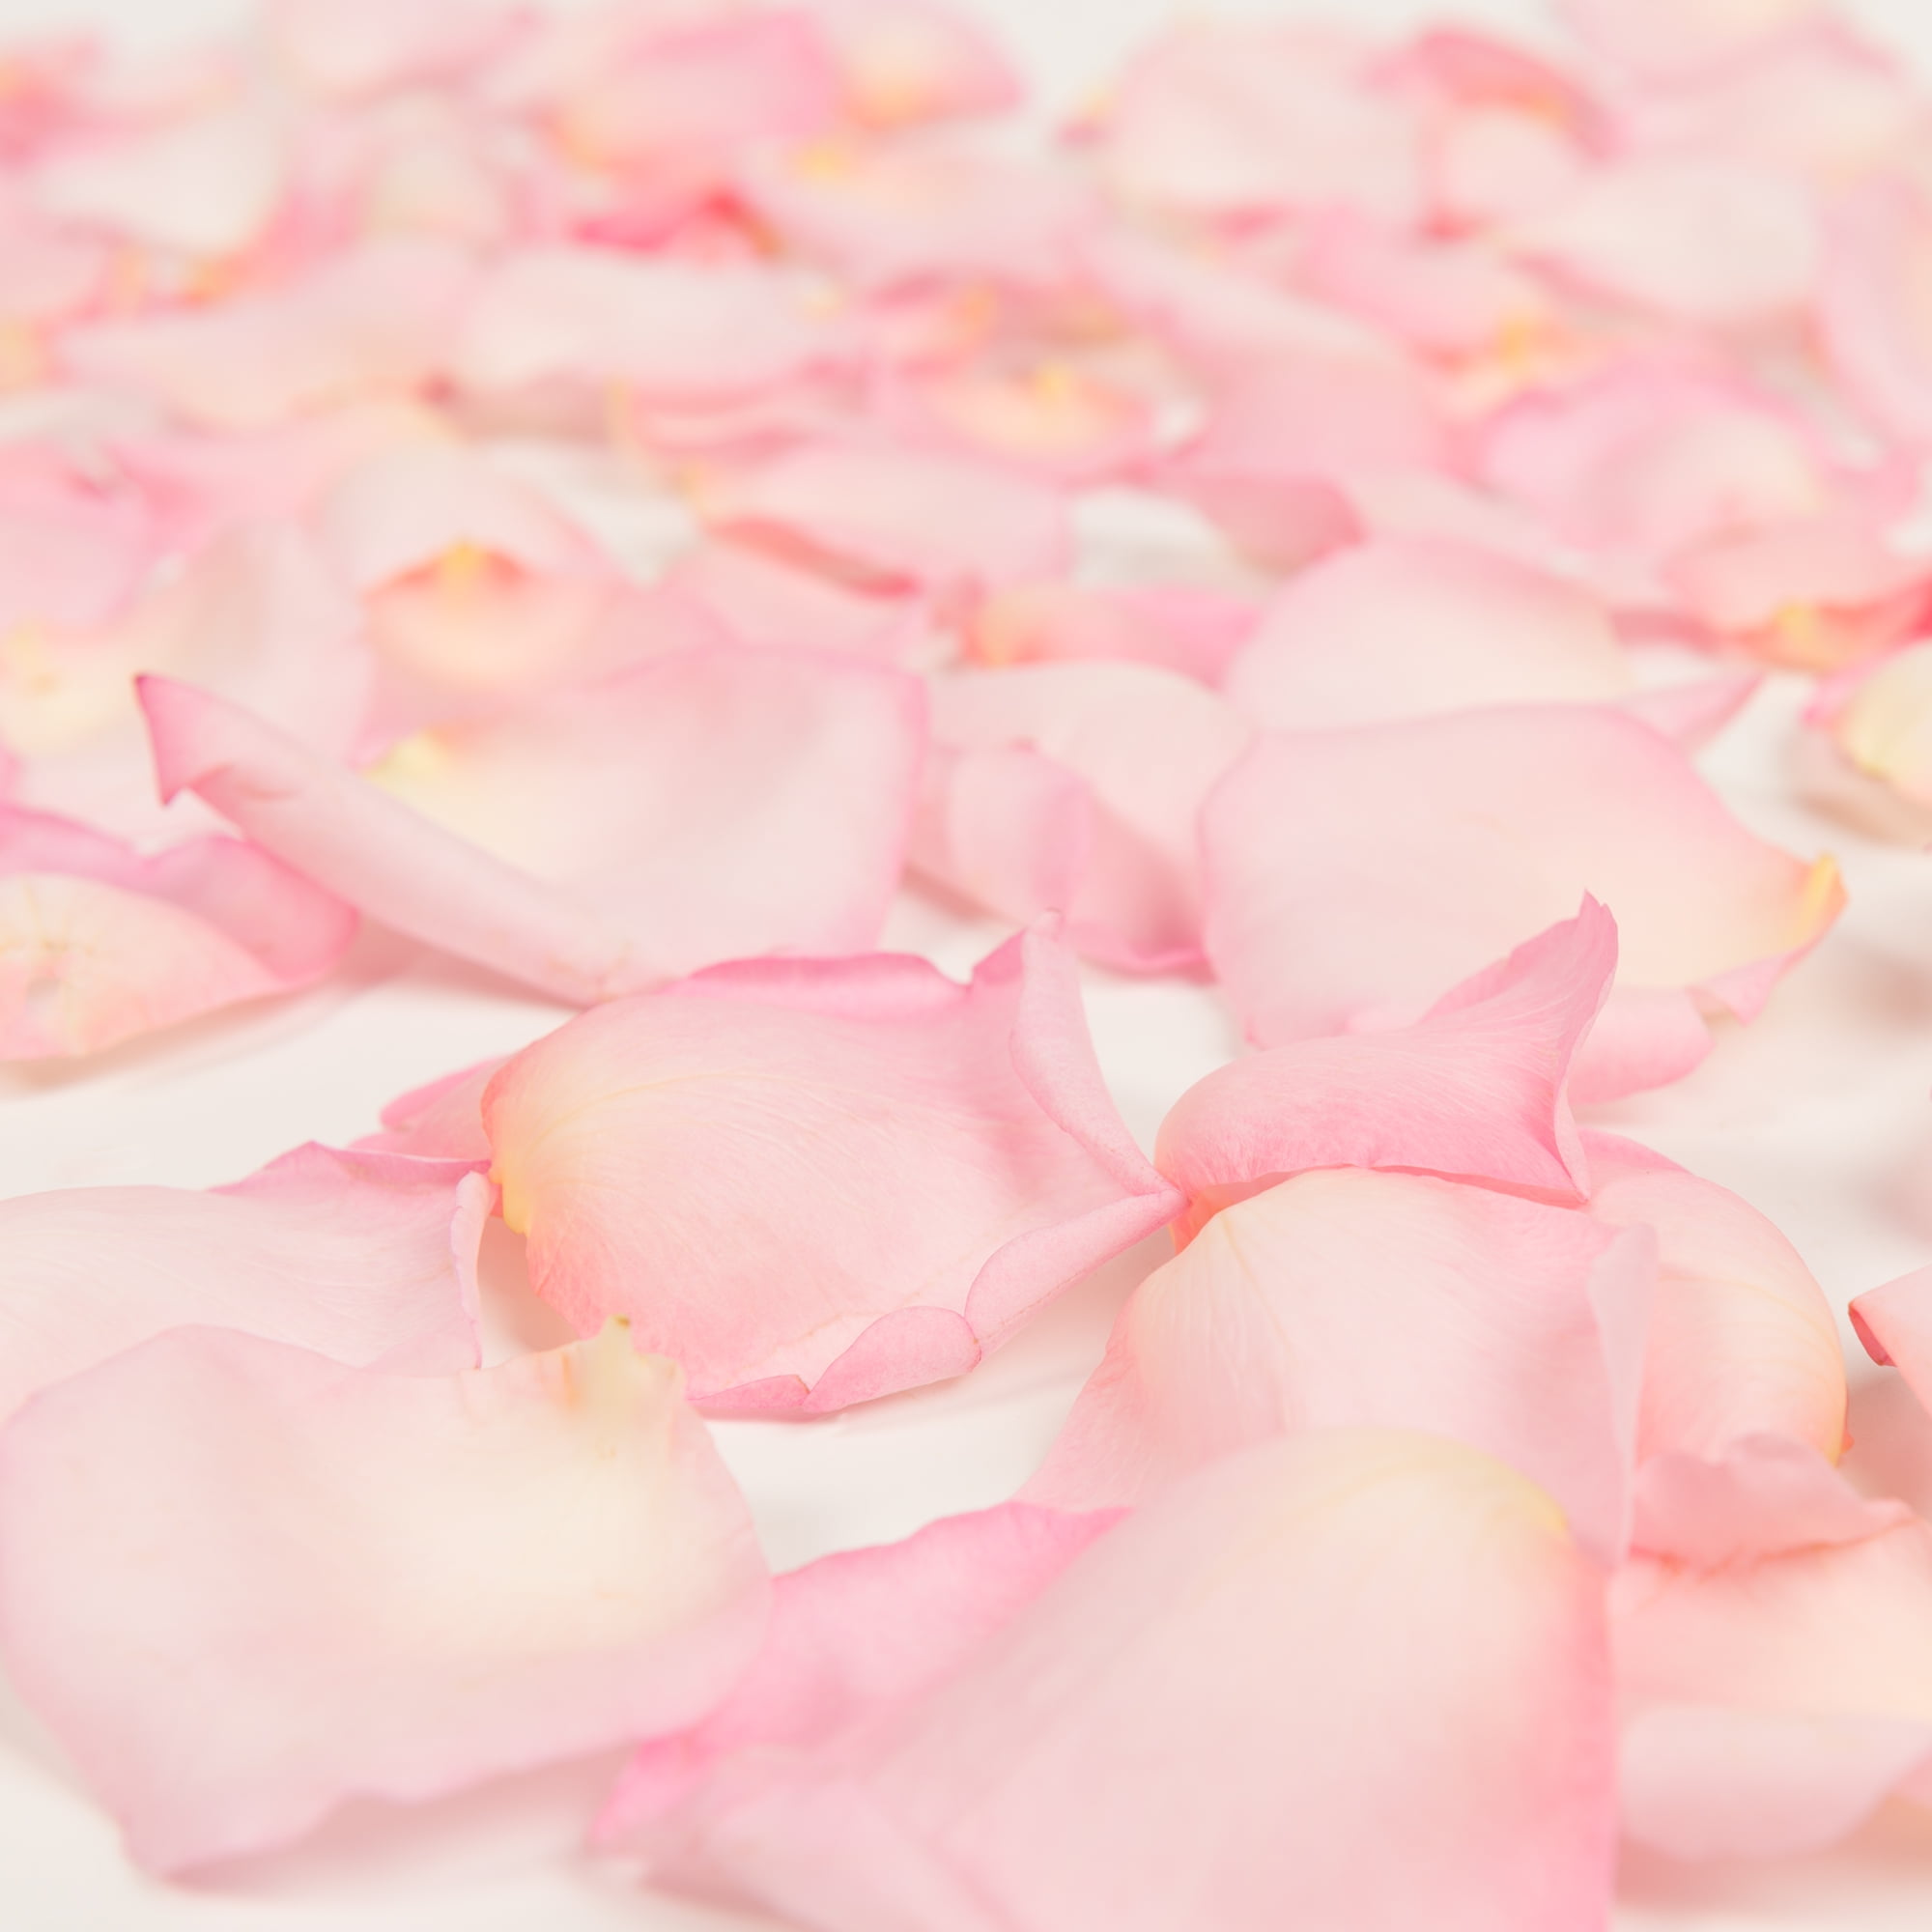 Rose Petals 3 Bags of Pink Farm Direct Fresh Cut Flower Petals by Bloomingmore, Size: 250 Gr